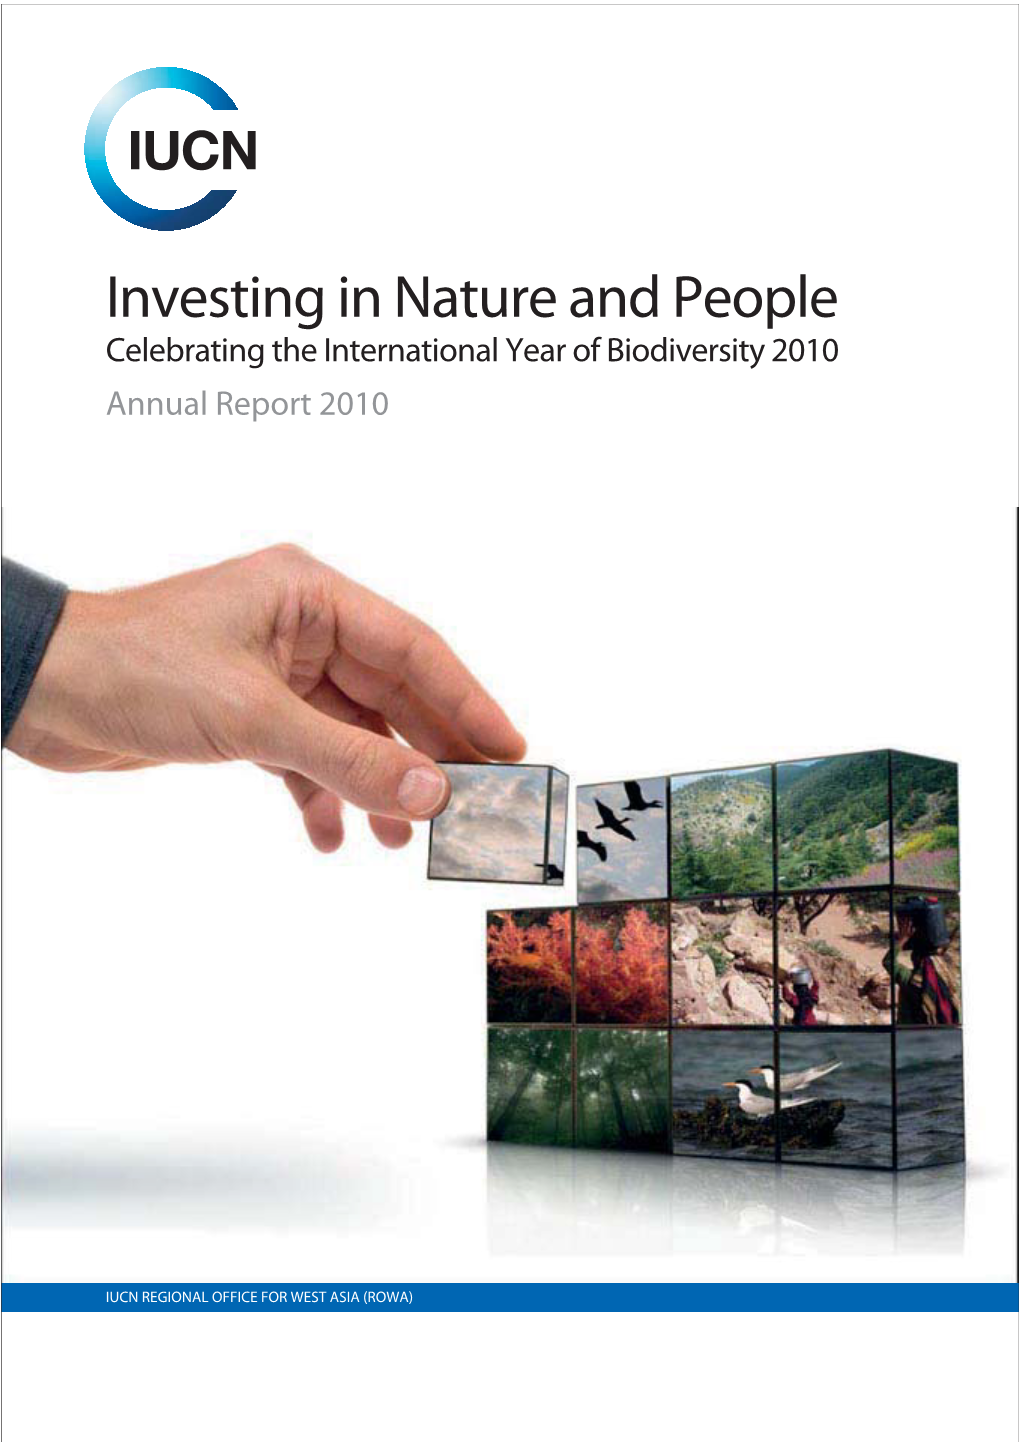 Investing in Nature and People Celebrating the International Year of Biodiversity 2010 Annual Report 2010